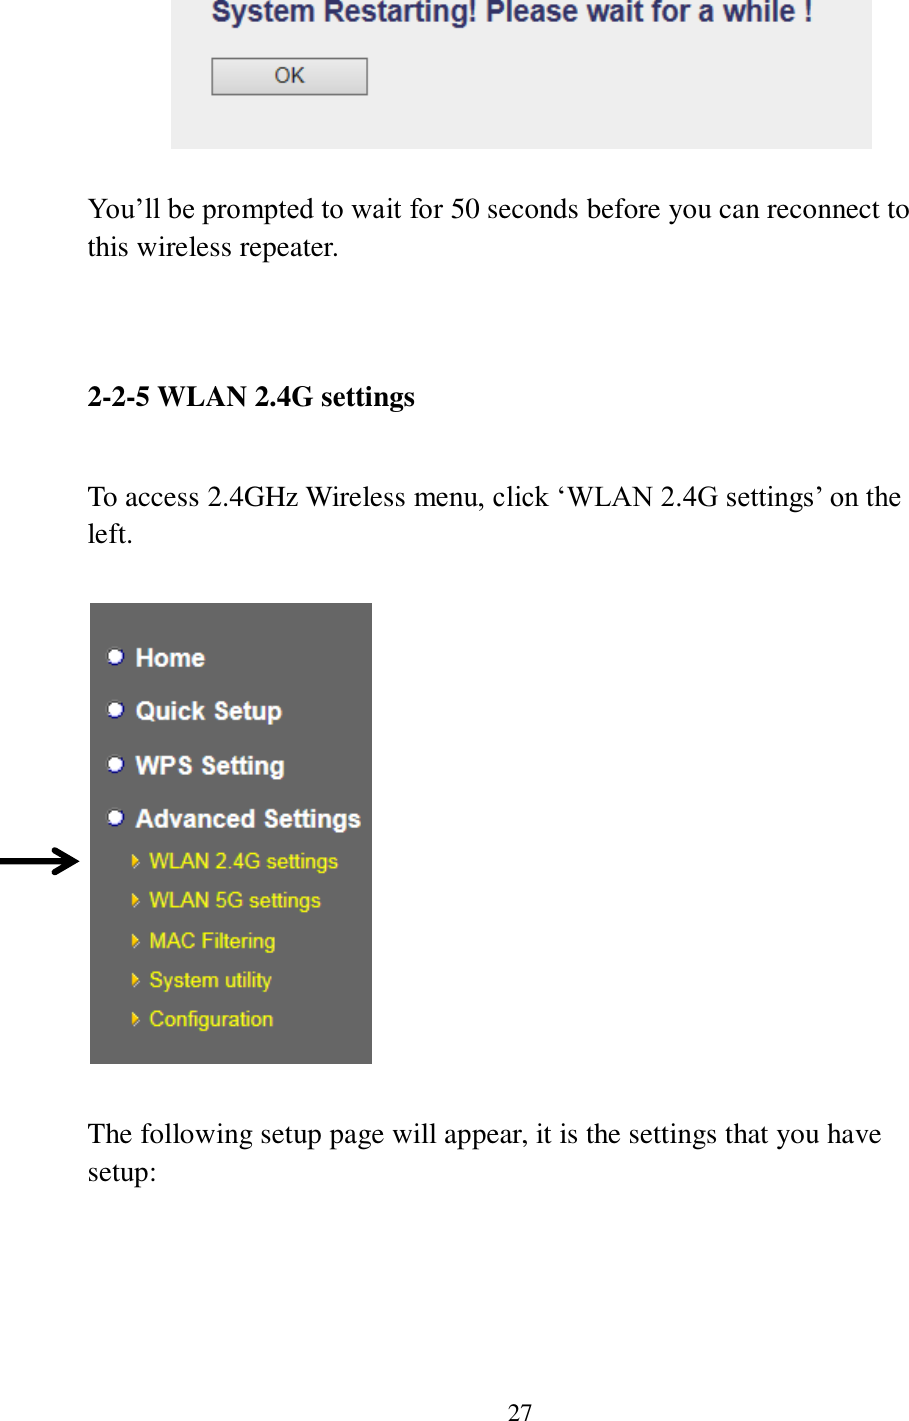 27    You’ll be prompted to wait for 50 seconds before you can reconnect to this wireless repeater.    2-2-5 WLAN 2.4G settings  To access 2.4GHz Wireless menu, click ‘WLAN 2.4G settings’ on the left.    The following setup page will appear, it is the settings that you have setup:  